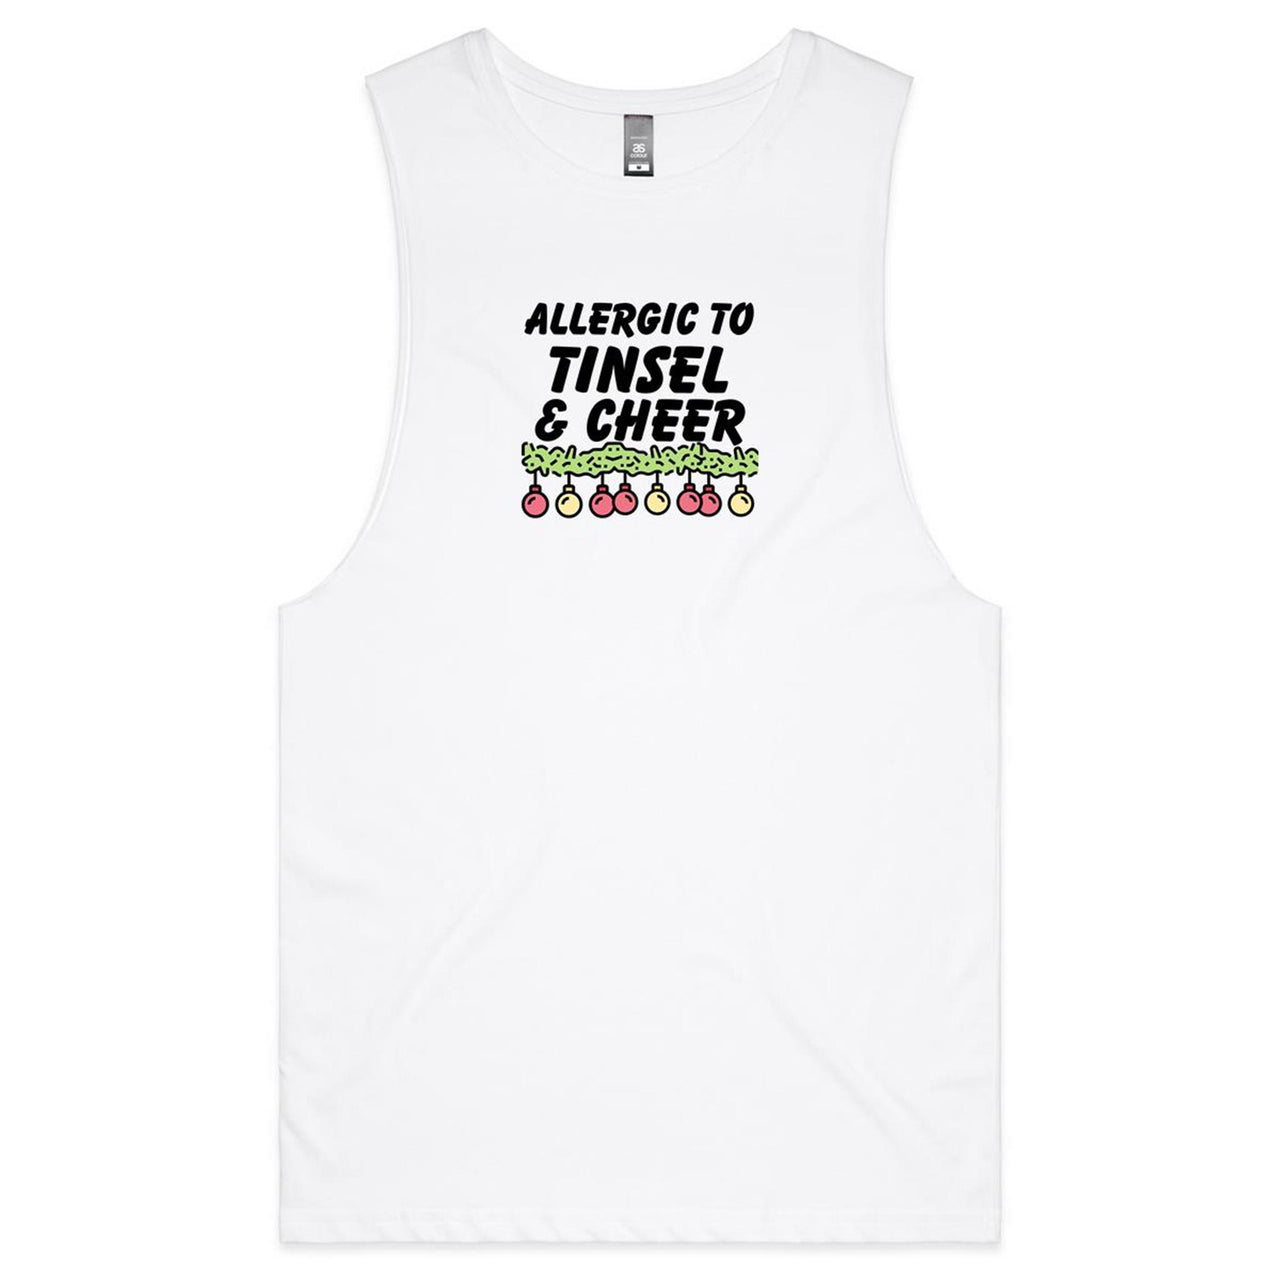 CBF Allergic to Tinsel and Cheer Christmas Tank Top Tee white